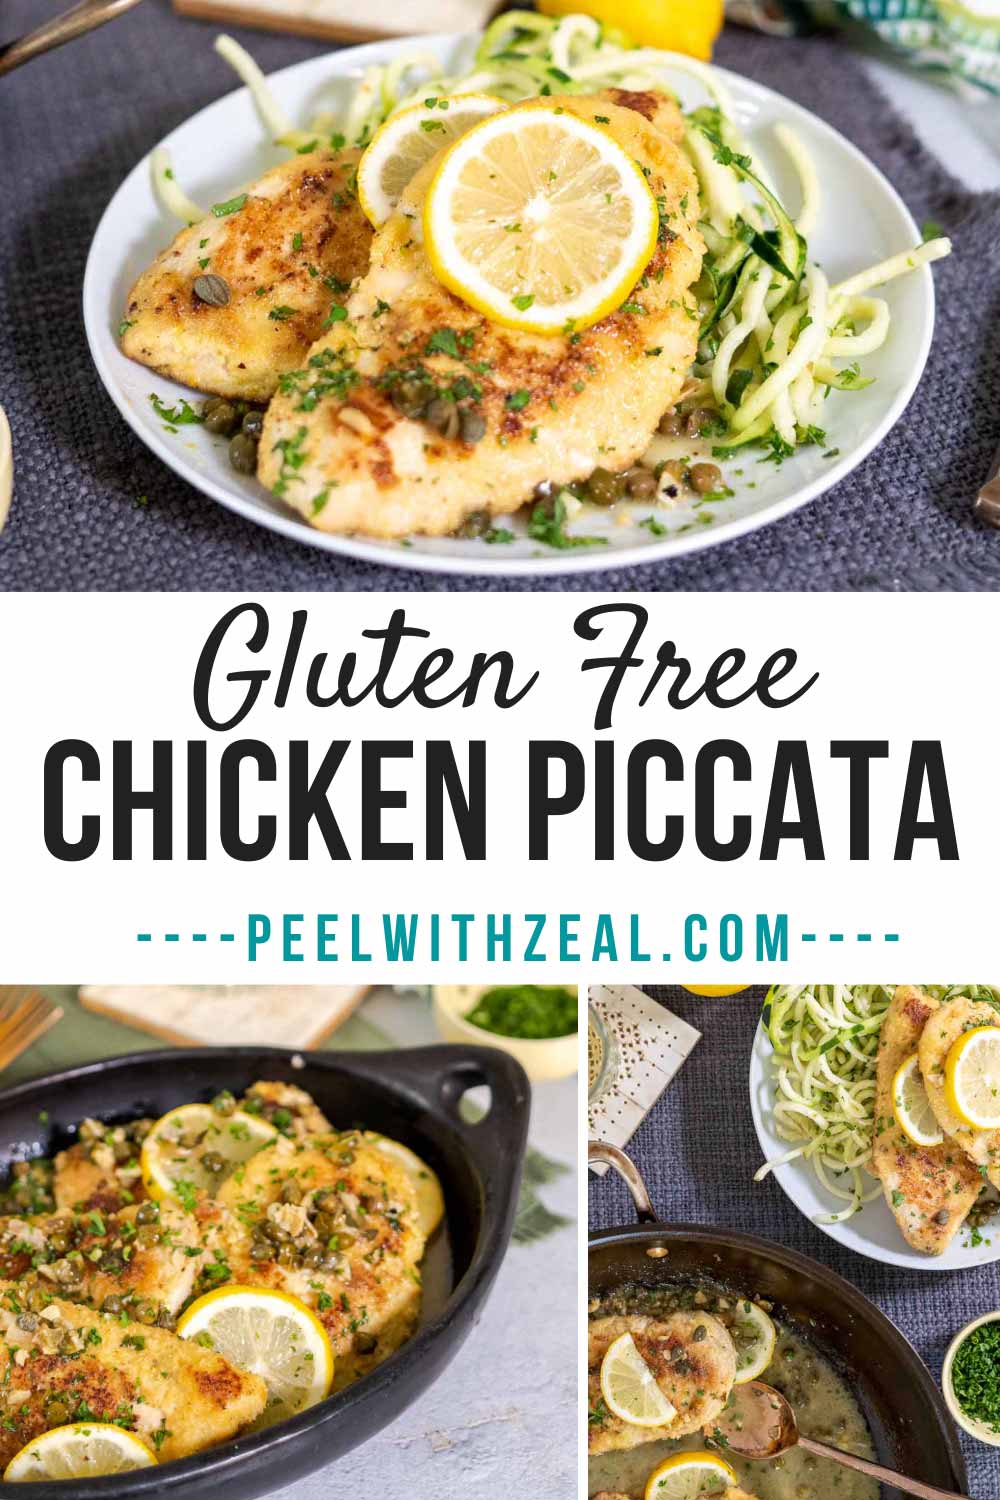 Gluten-Free Chicken Piccata (Under 30 Mintues!) - Peel with Zeal